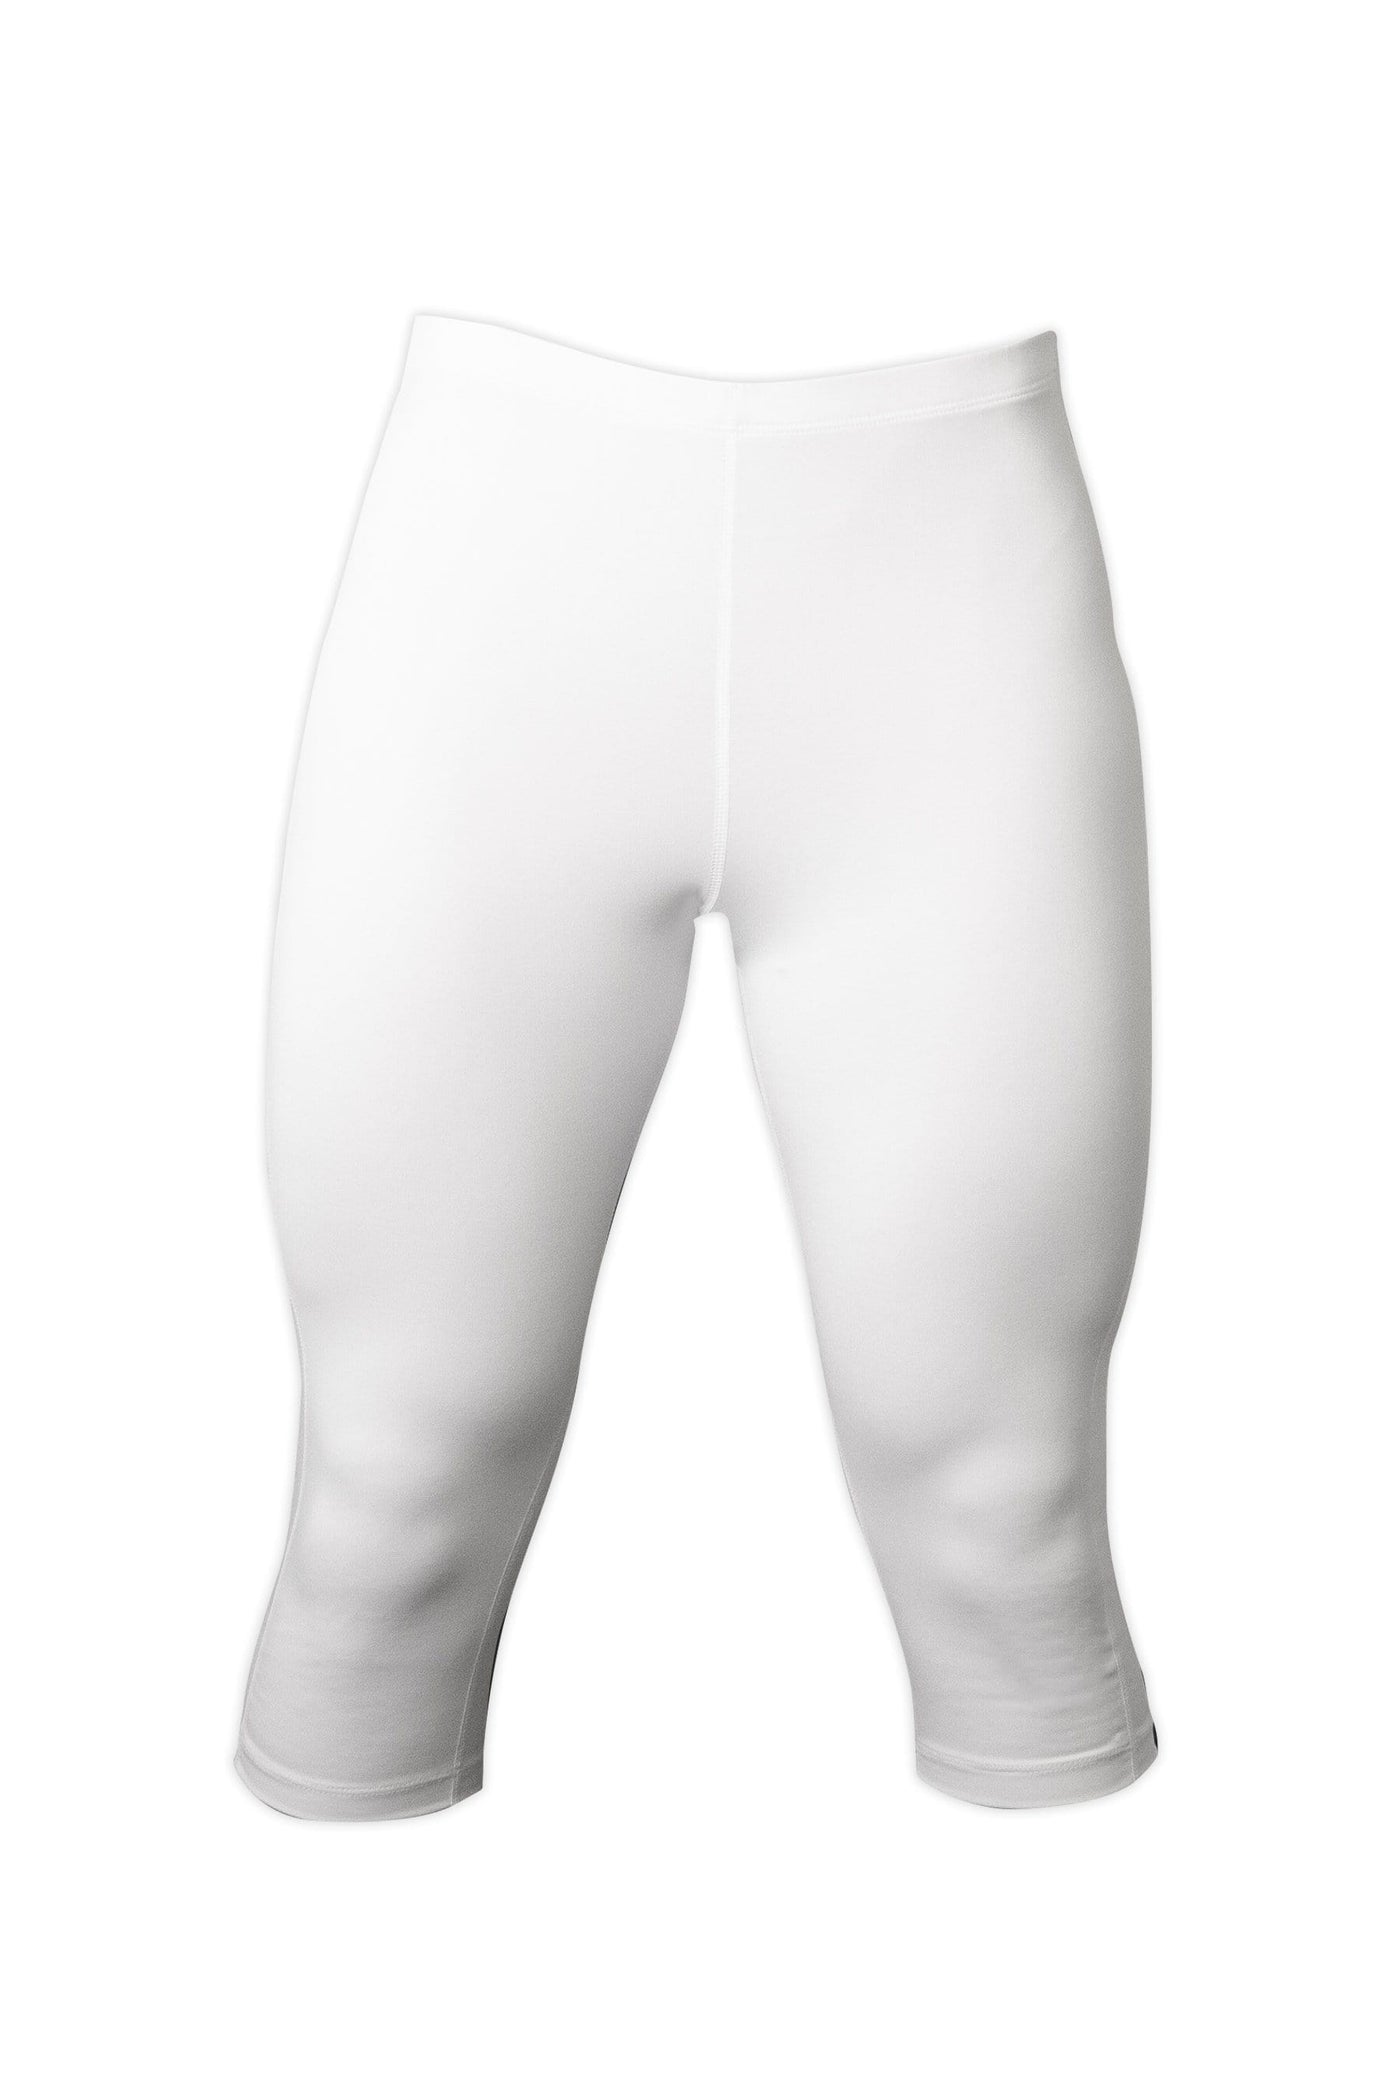 Dizoboee Youth Boys Compression Pants One Leg 3/4 Leggings for Sports Kids  Basketball Tights 2 Pack White+black (Right Short) Medium